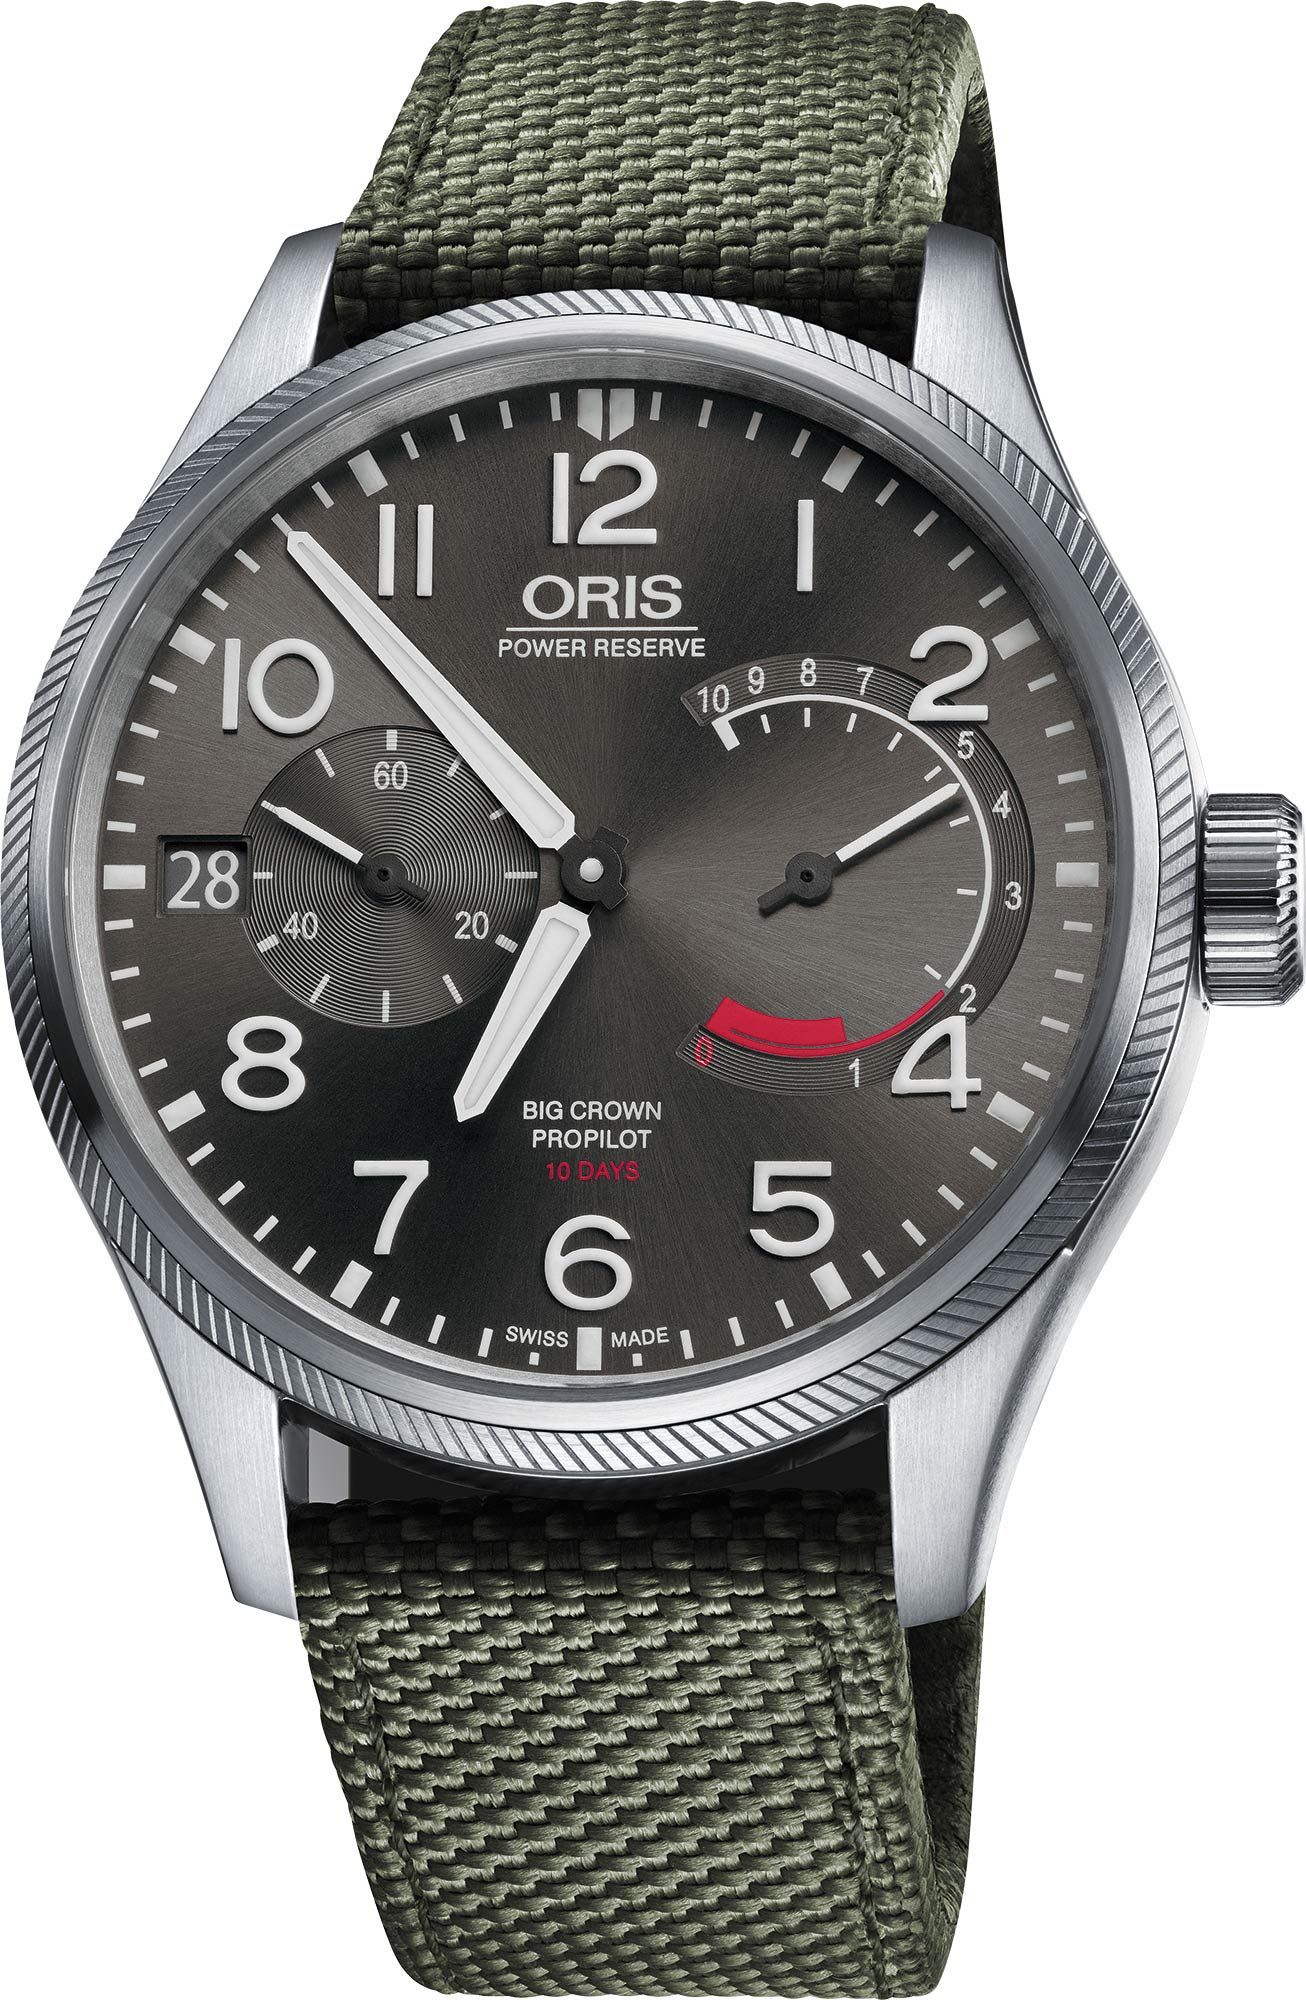 Oris Aviation Big Crown Calibre 111 Anthracite Dial 44 mm Manual Winding Watch For Men - 1